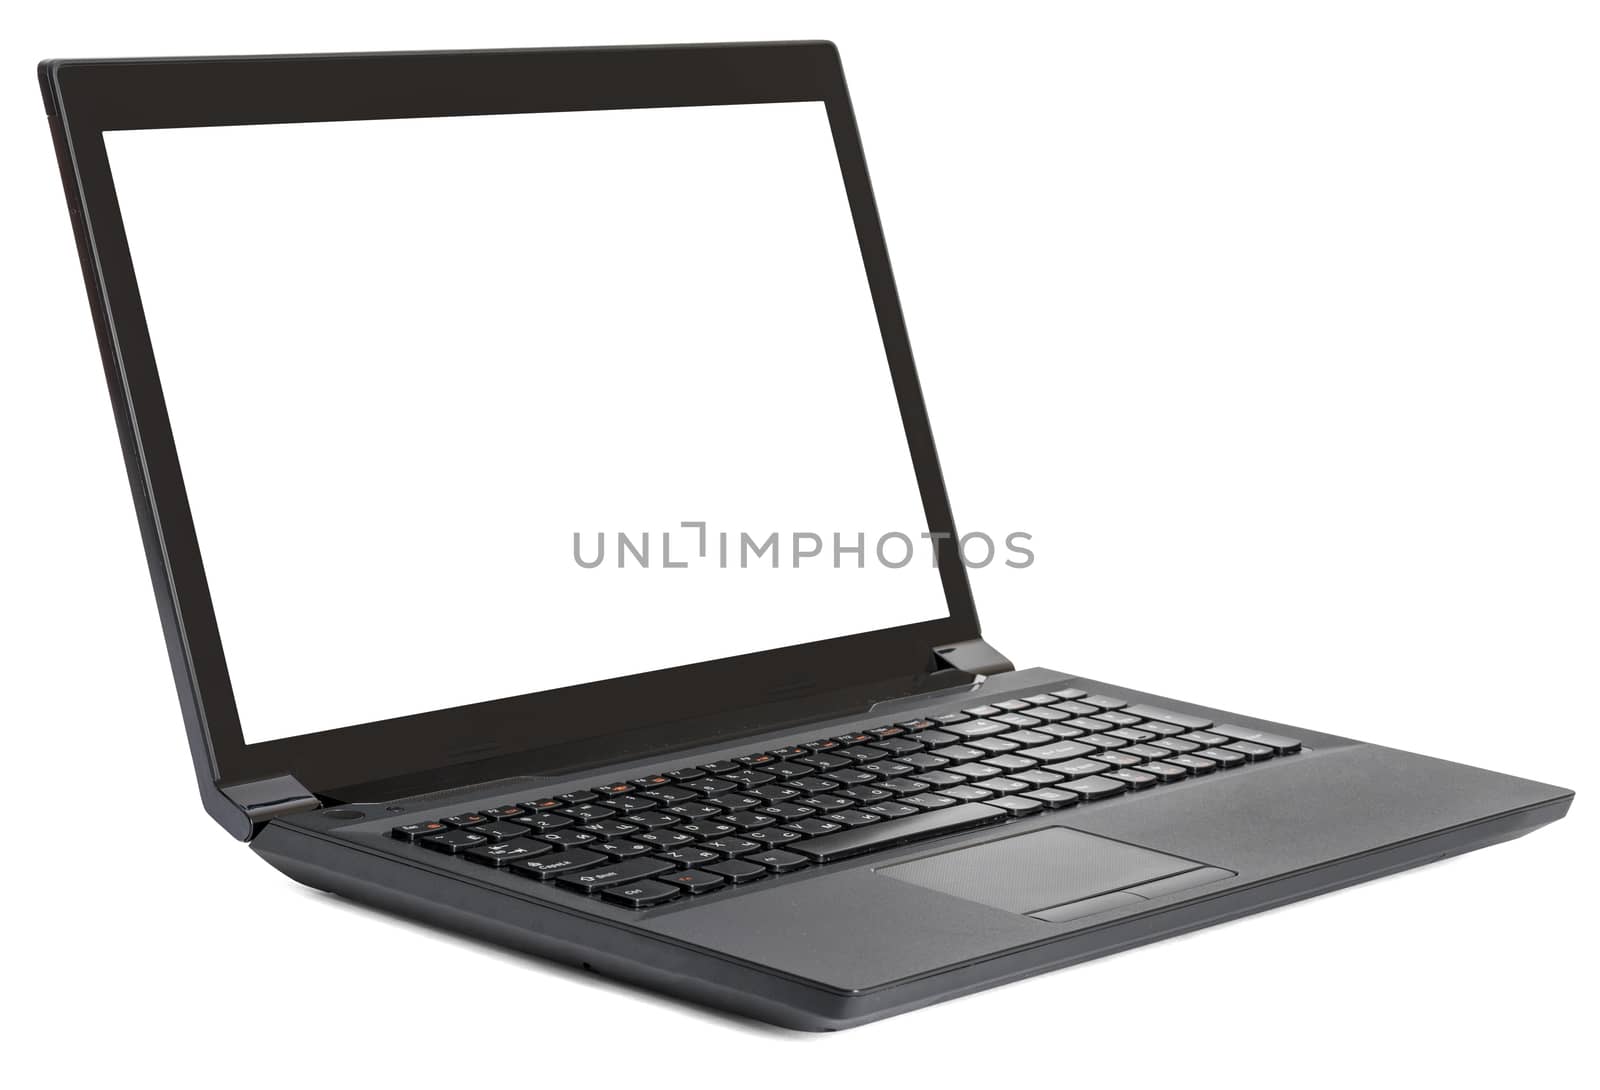 Laptop with empty screen isolated on white background, side view